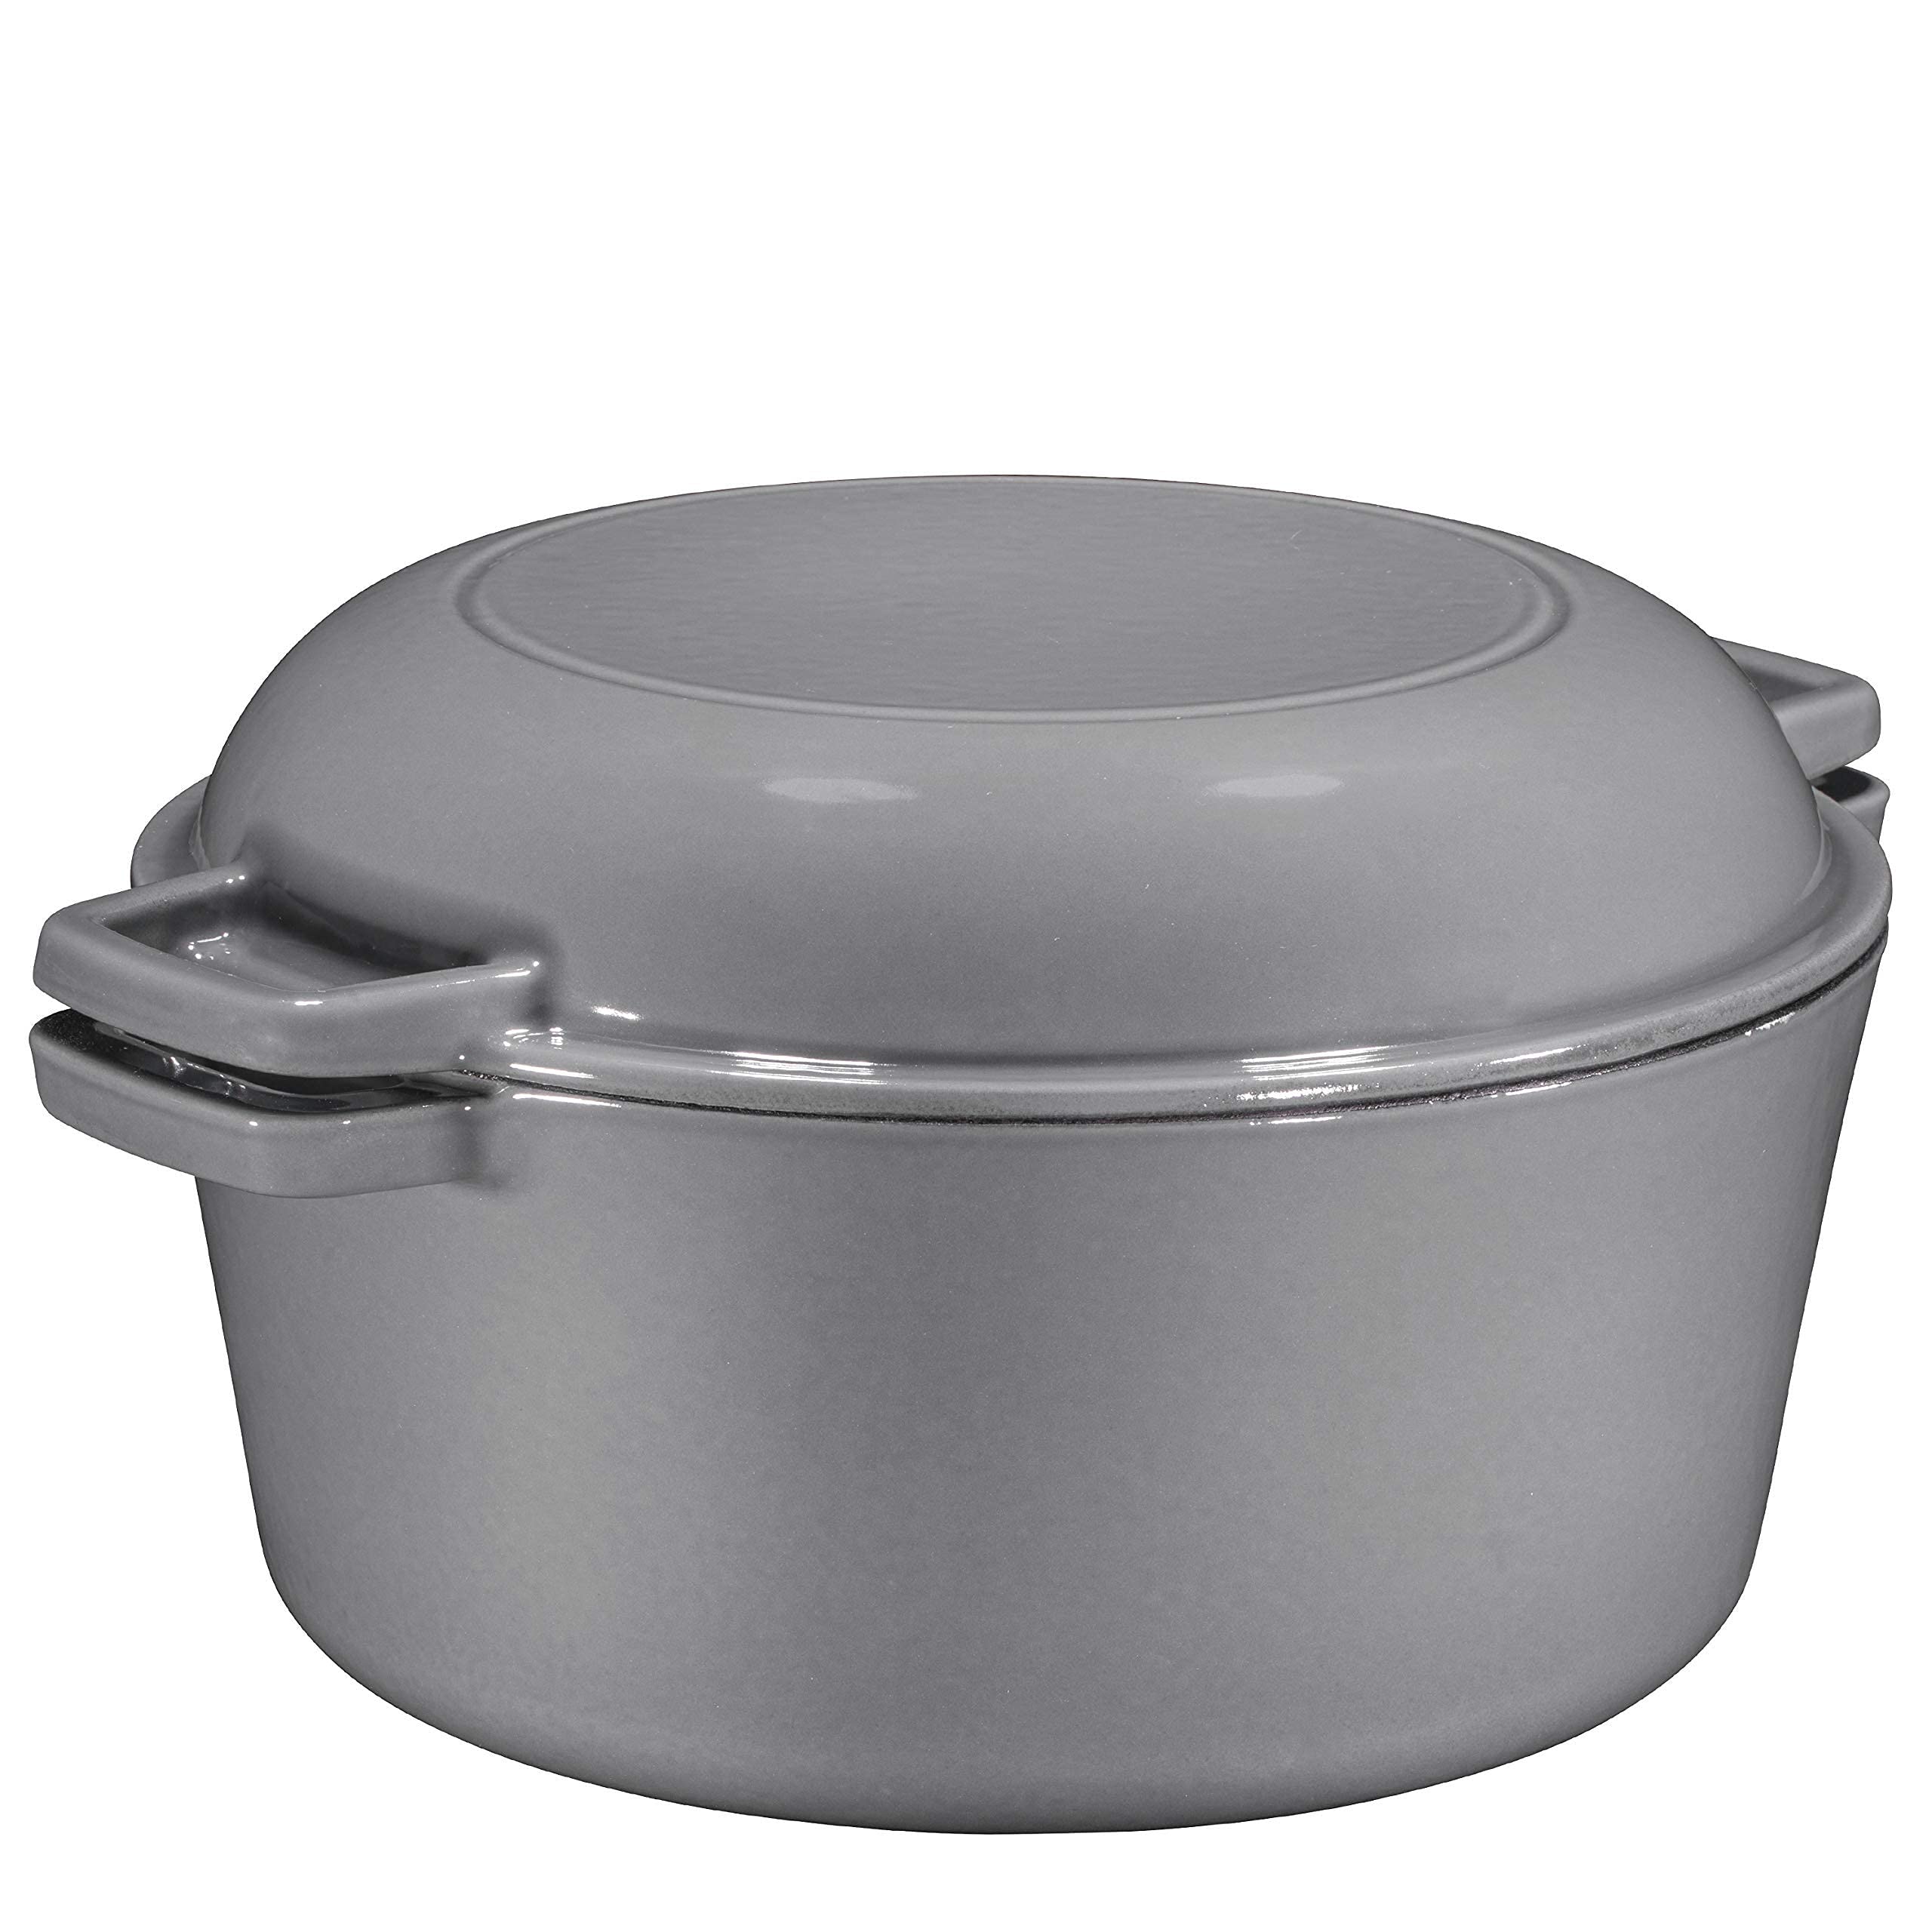 Bruntmor 2 in 1 Enameled cast Iron Double Dutch Oven & Skillet Lid, 5-Quart, Induction, Electric, gas & In Oven compatible, grey